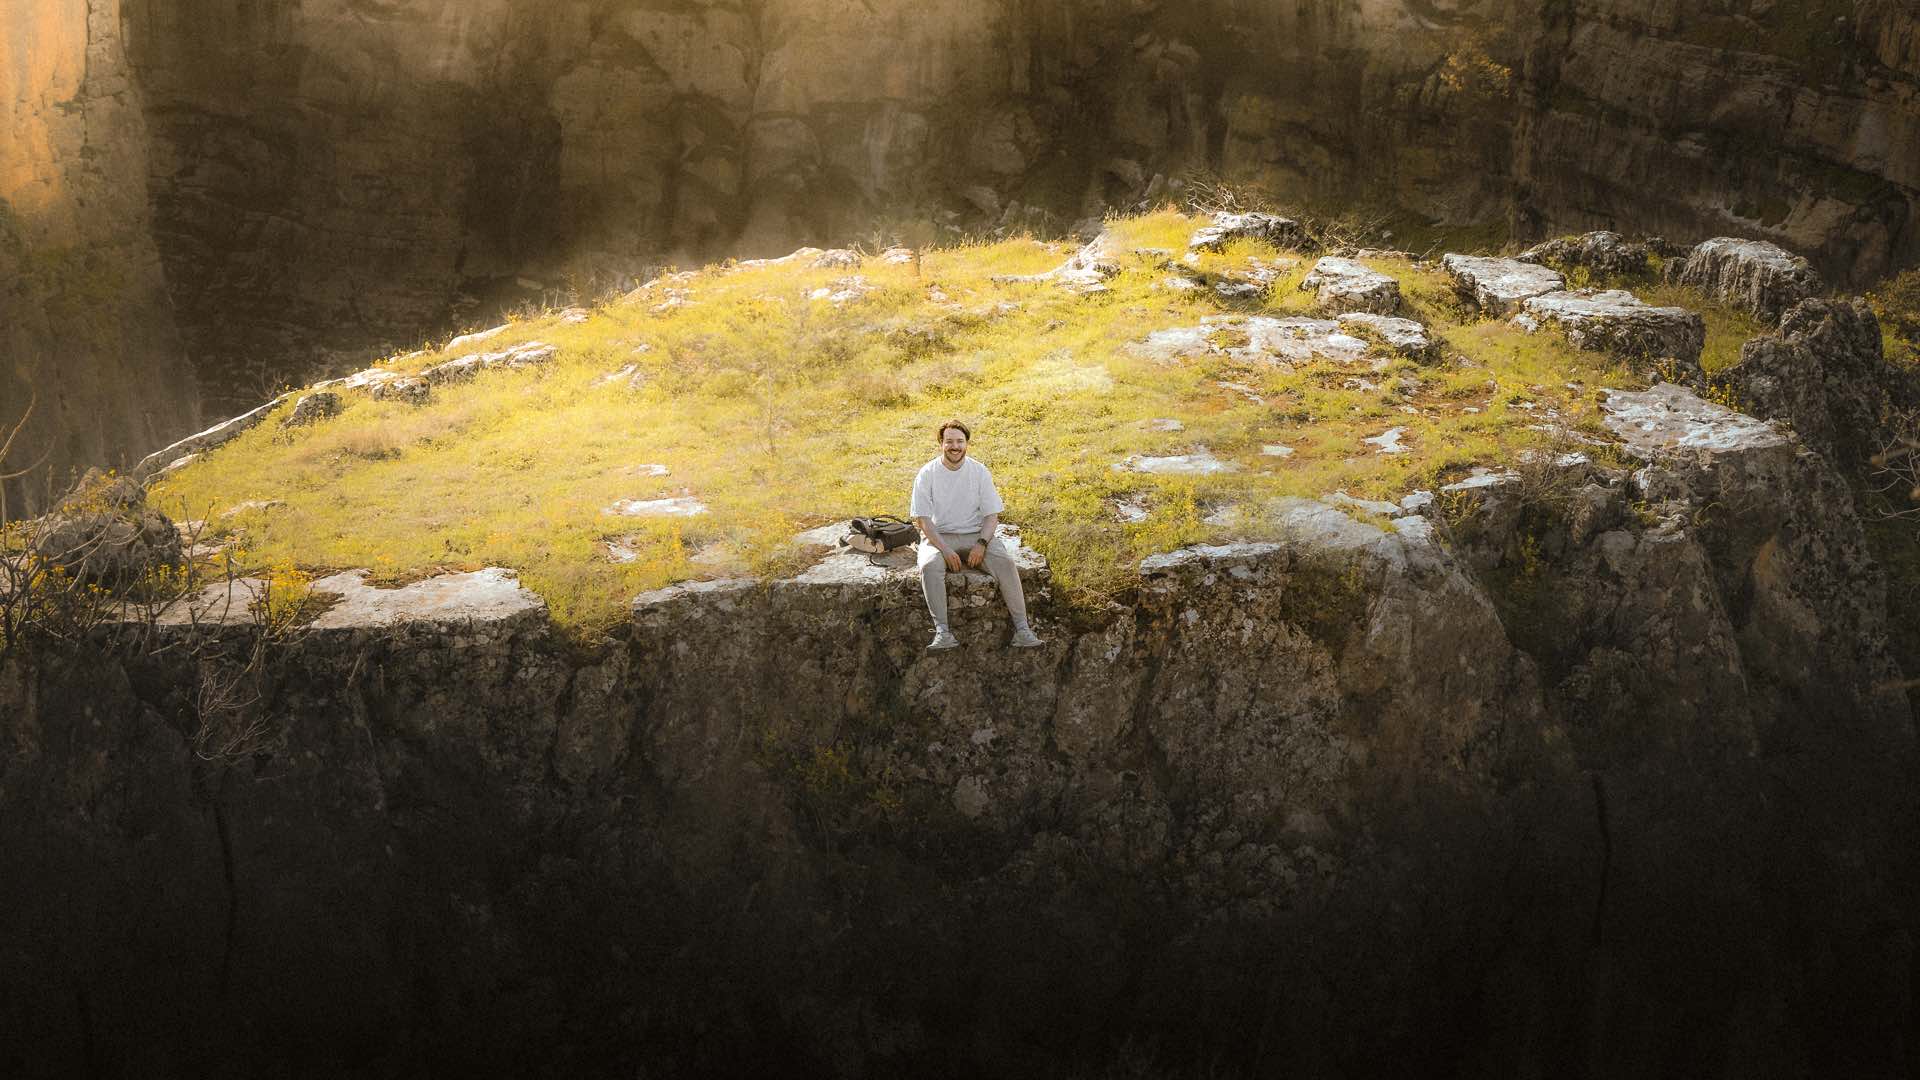 A person sitting on a rocky outcrop, overlooking a deep canyon, surrounded by sunlight and grassy terrain, prominently featured on the front page designed with Elementor.